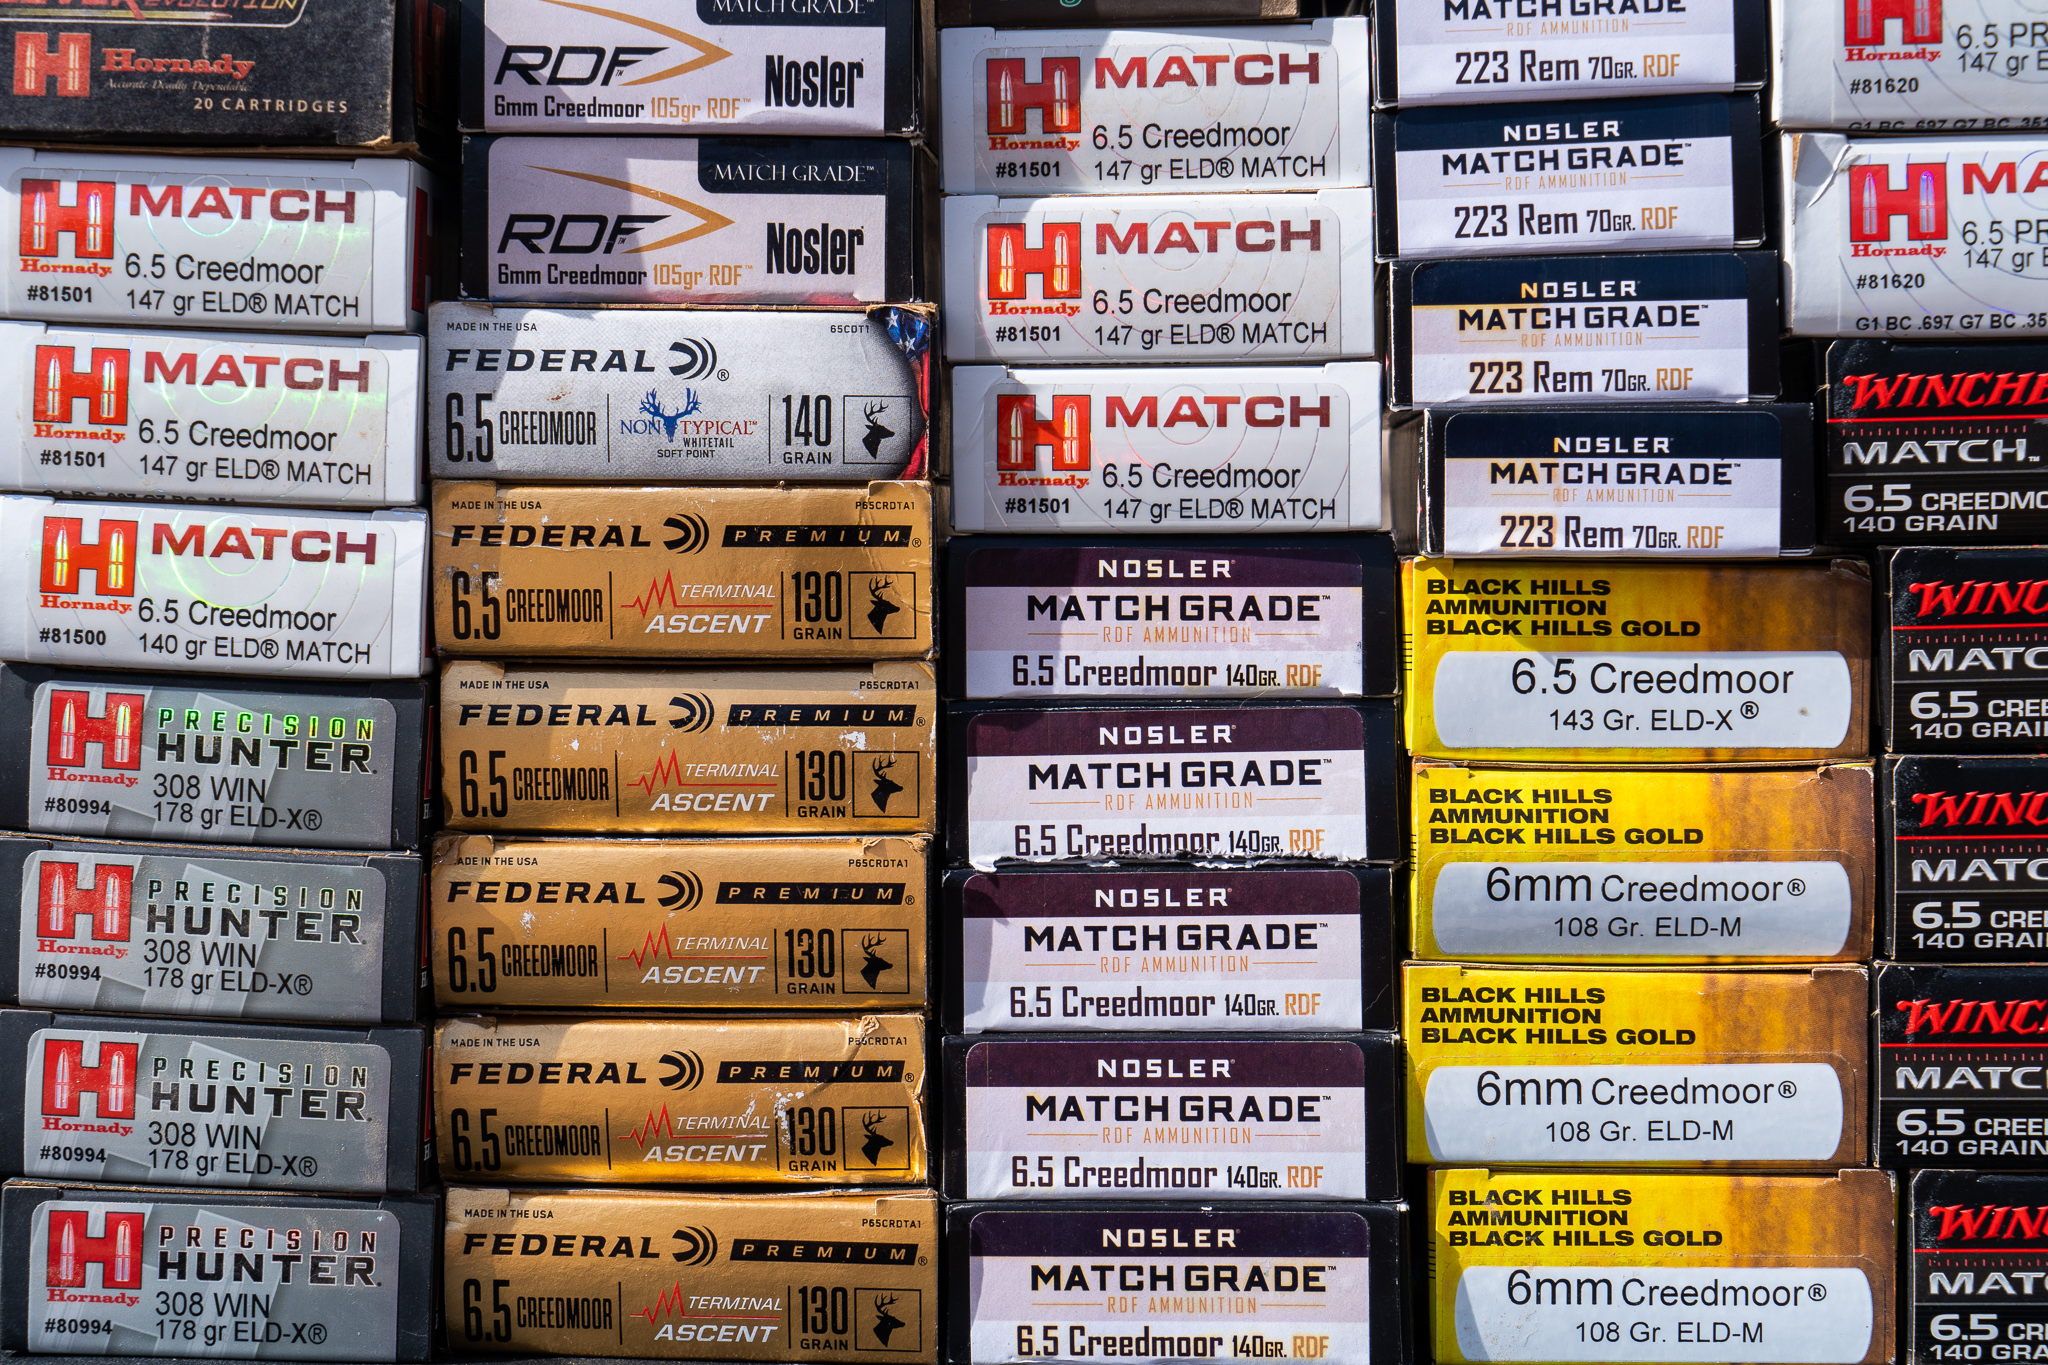 Rifle ammo at the Outdoor Life gun test.